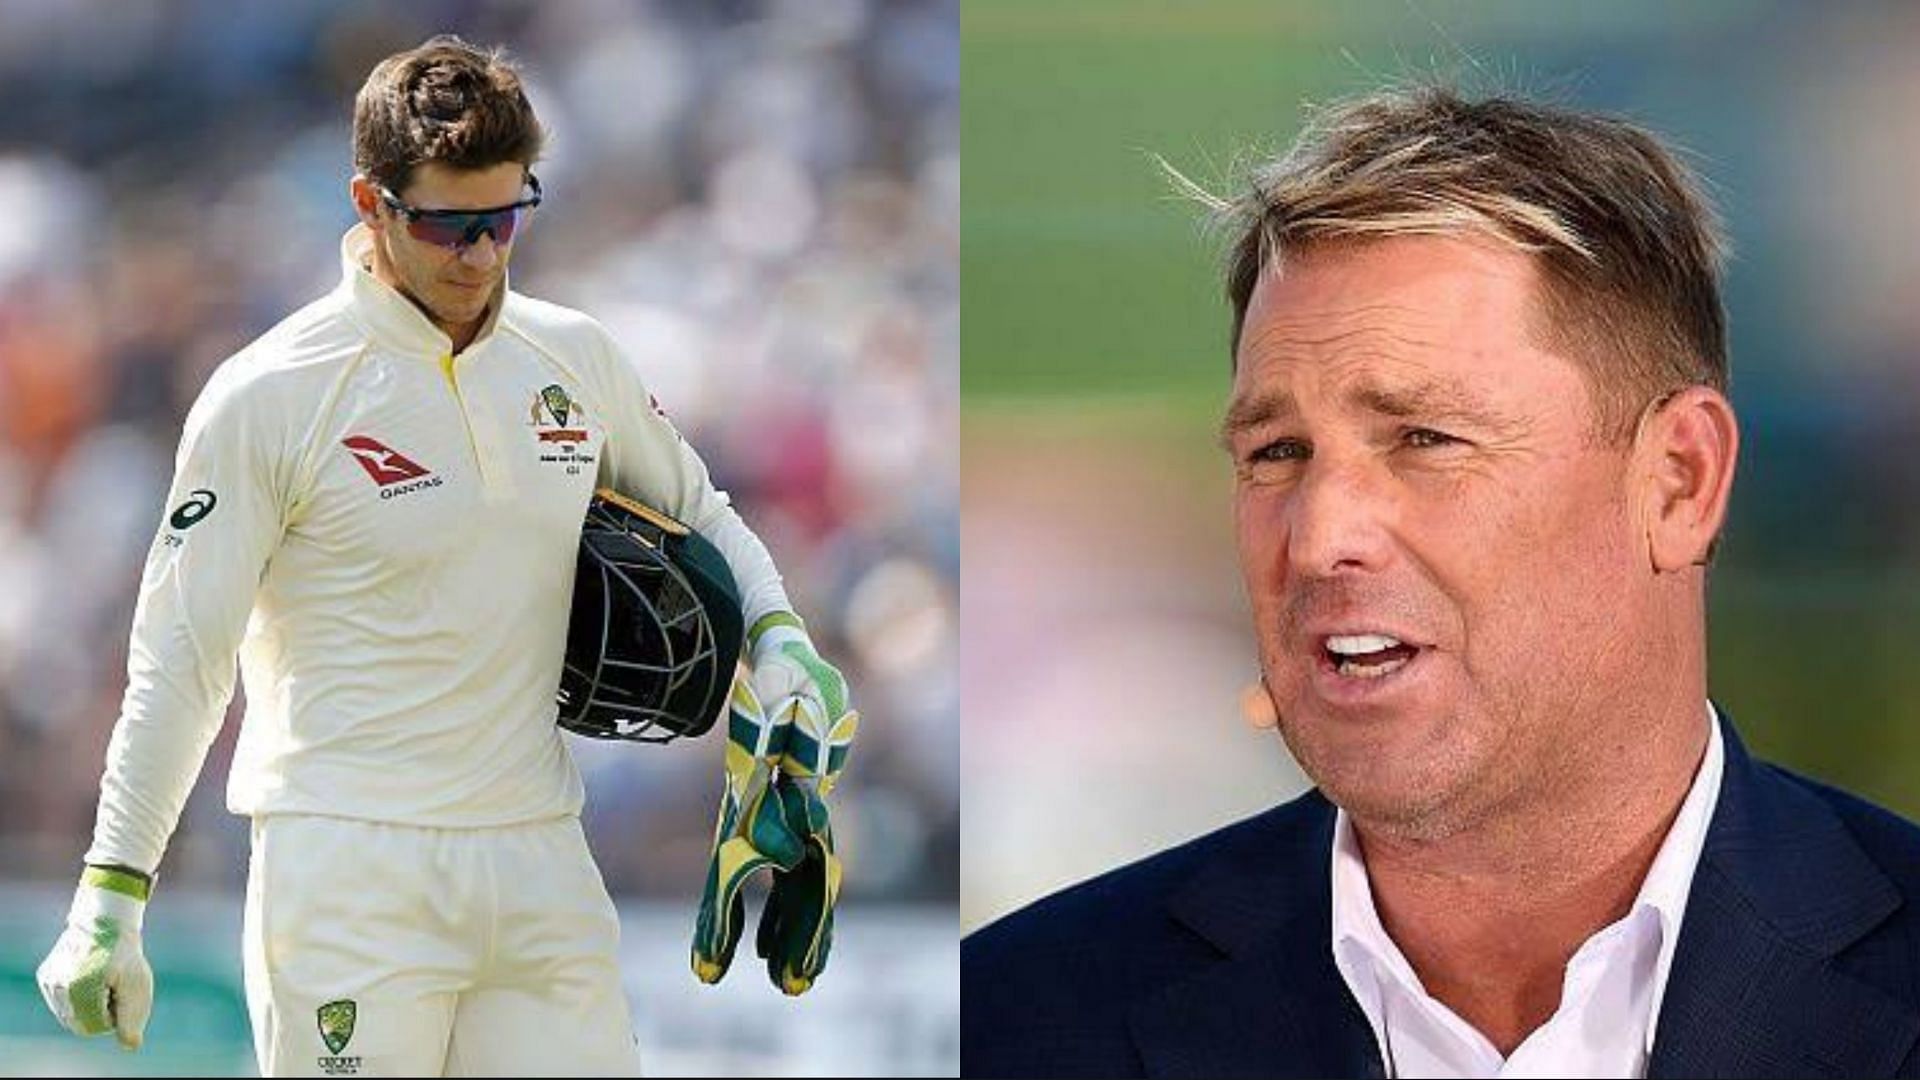 Shane Warne gave his views on who should replace Tim Paine